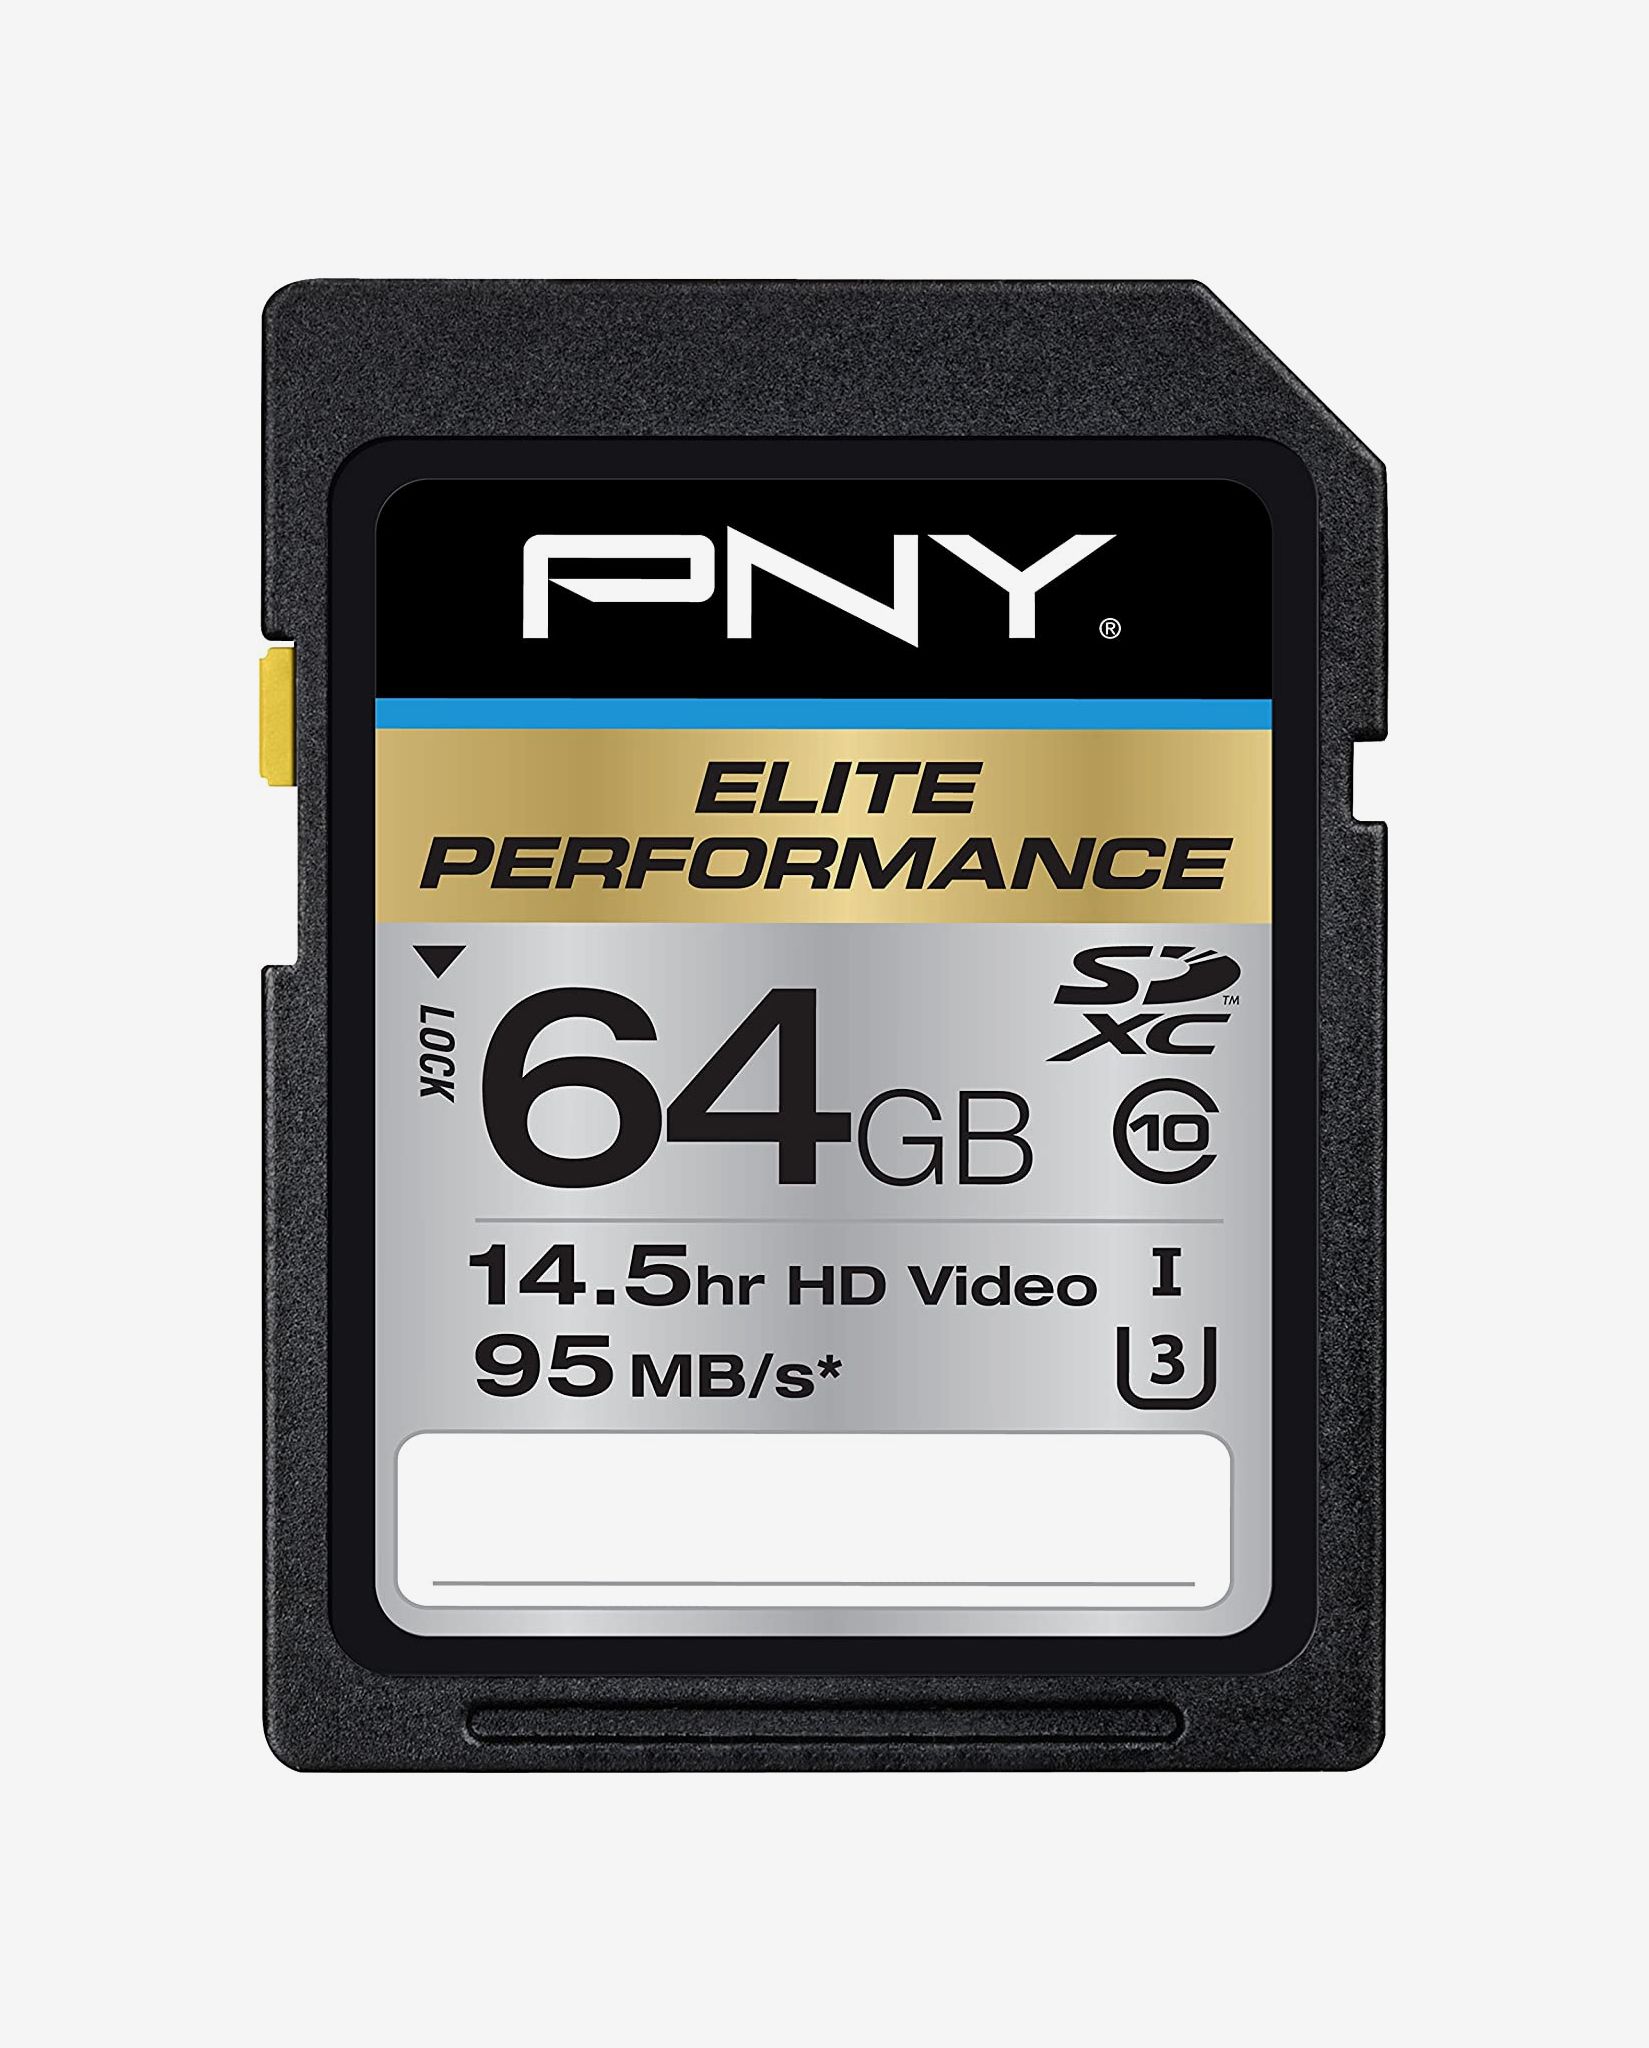 7 Best Sd Cards 21 The Strategist